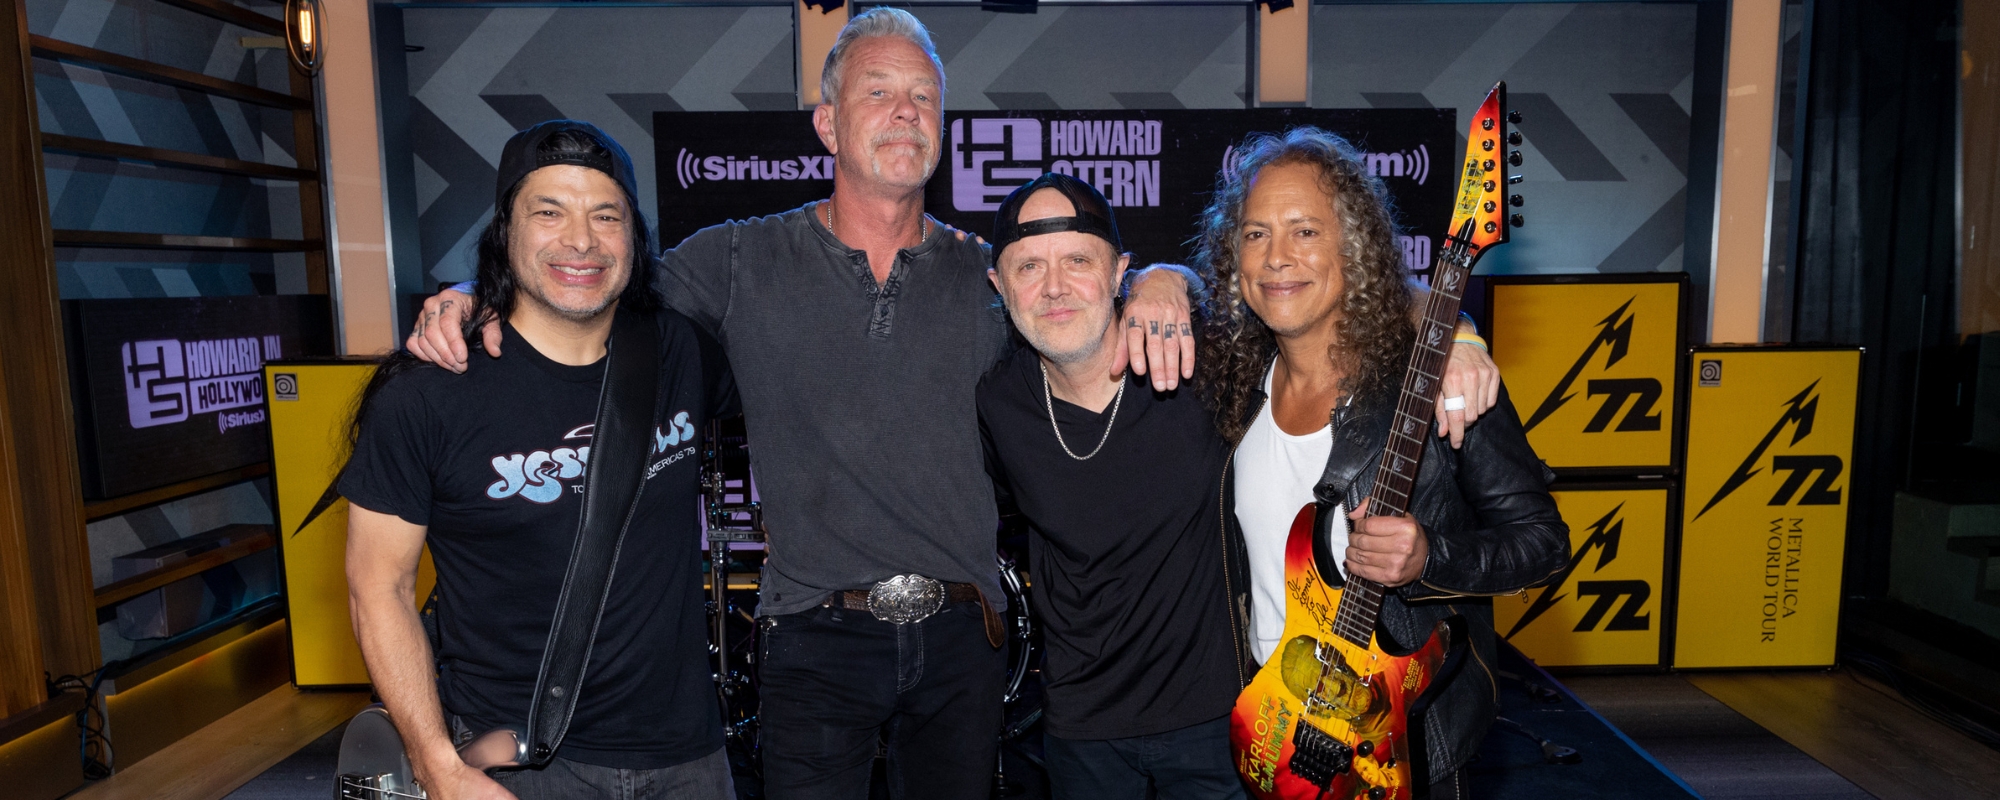 Metallica Announces First Saudi Arabia Performance, Honored with SoundExchange Hall of Fame Award